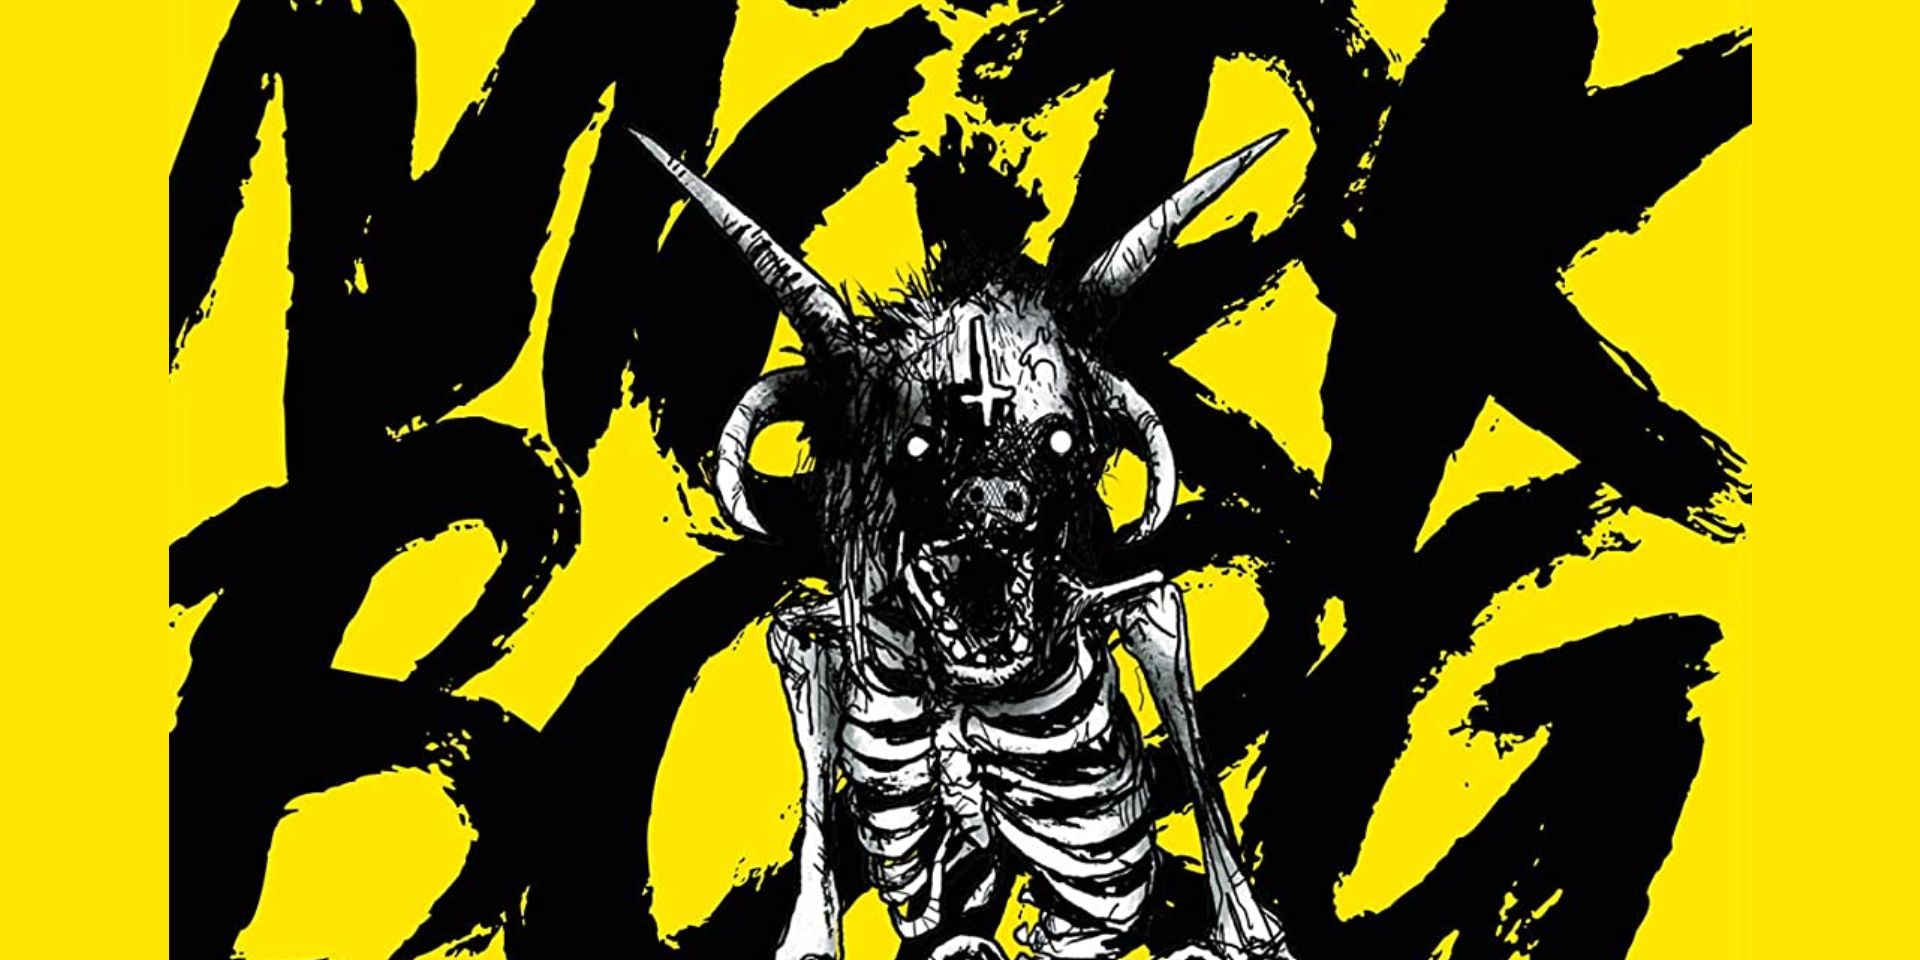 Mork Borg written in black on a yellow background with a scary skeleton-drawn creature with horns and an upside-down cross on its head in front.